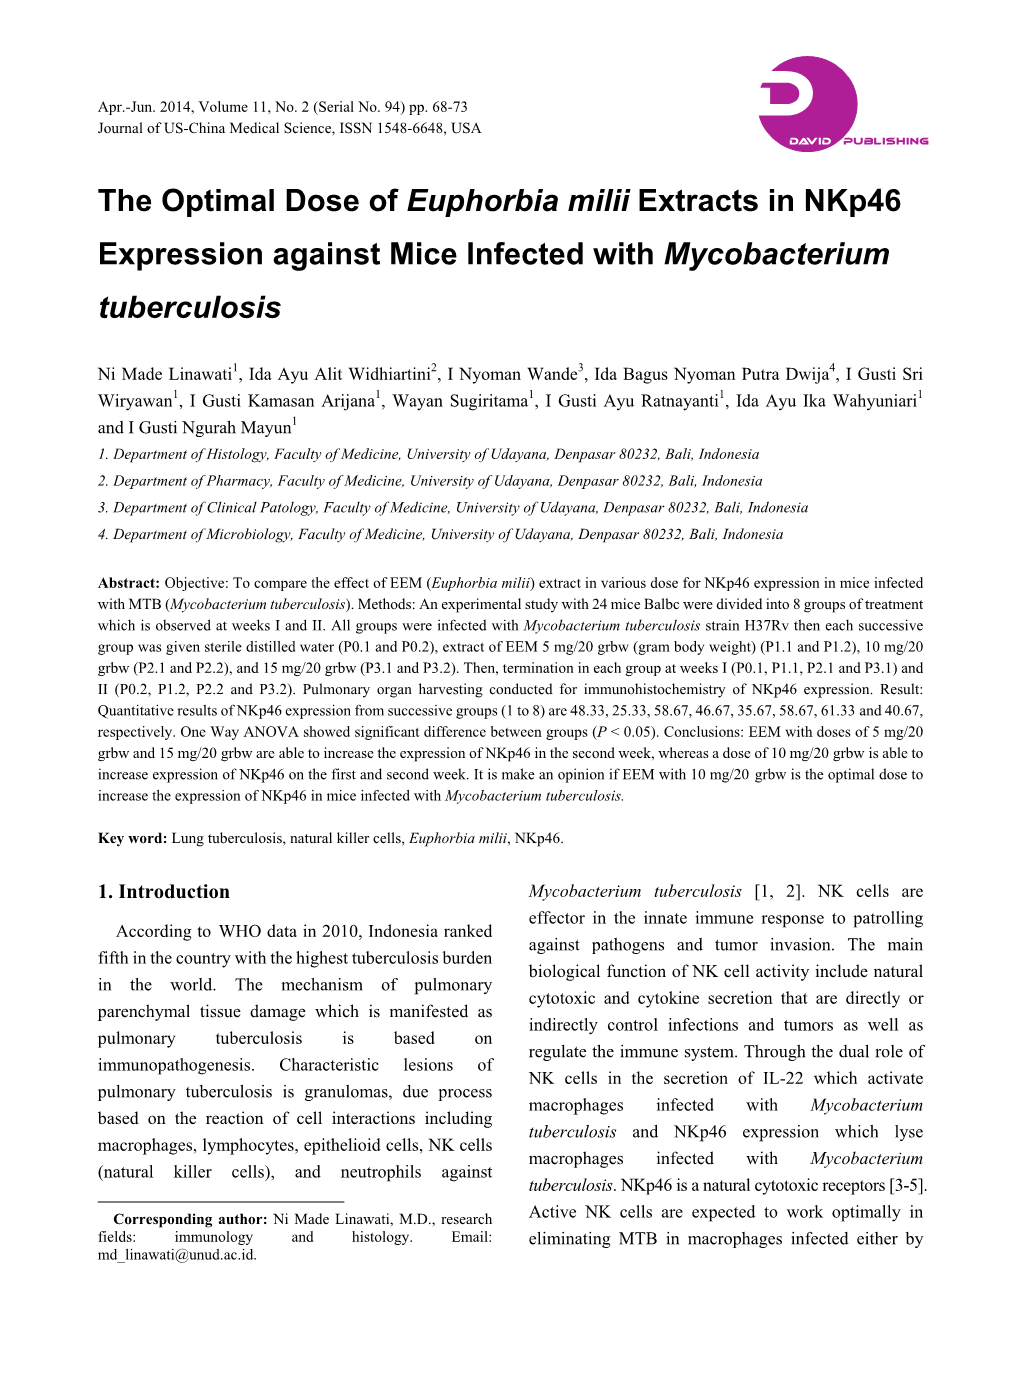 The Optimal Dose of Euphorbia Milii Extracts in Nkp46 Expression Against Mice Infected with Mycobacterium Tuberculosis